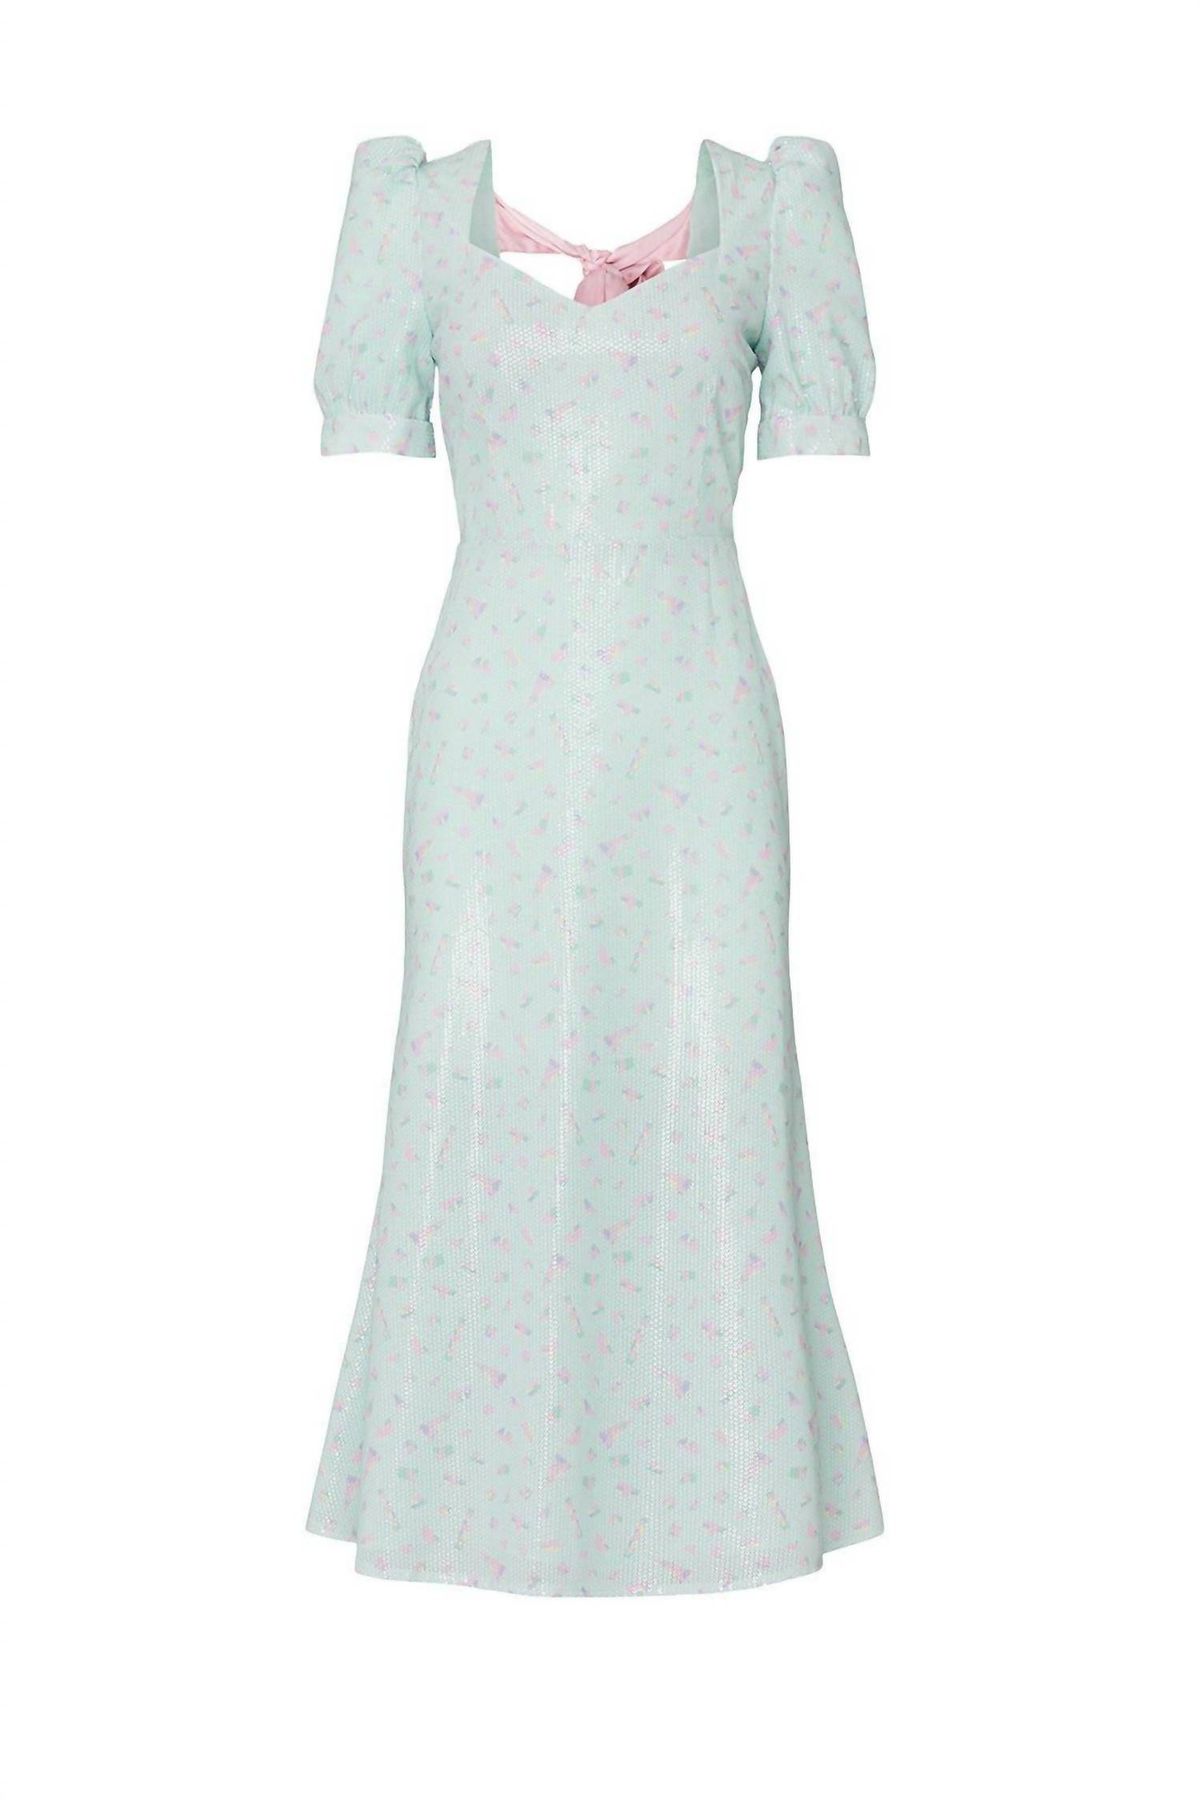 Style 1-1819459701-5649-1 Olivia Rubin Size 6 Light Green Cocktail Dress on Queenly